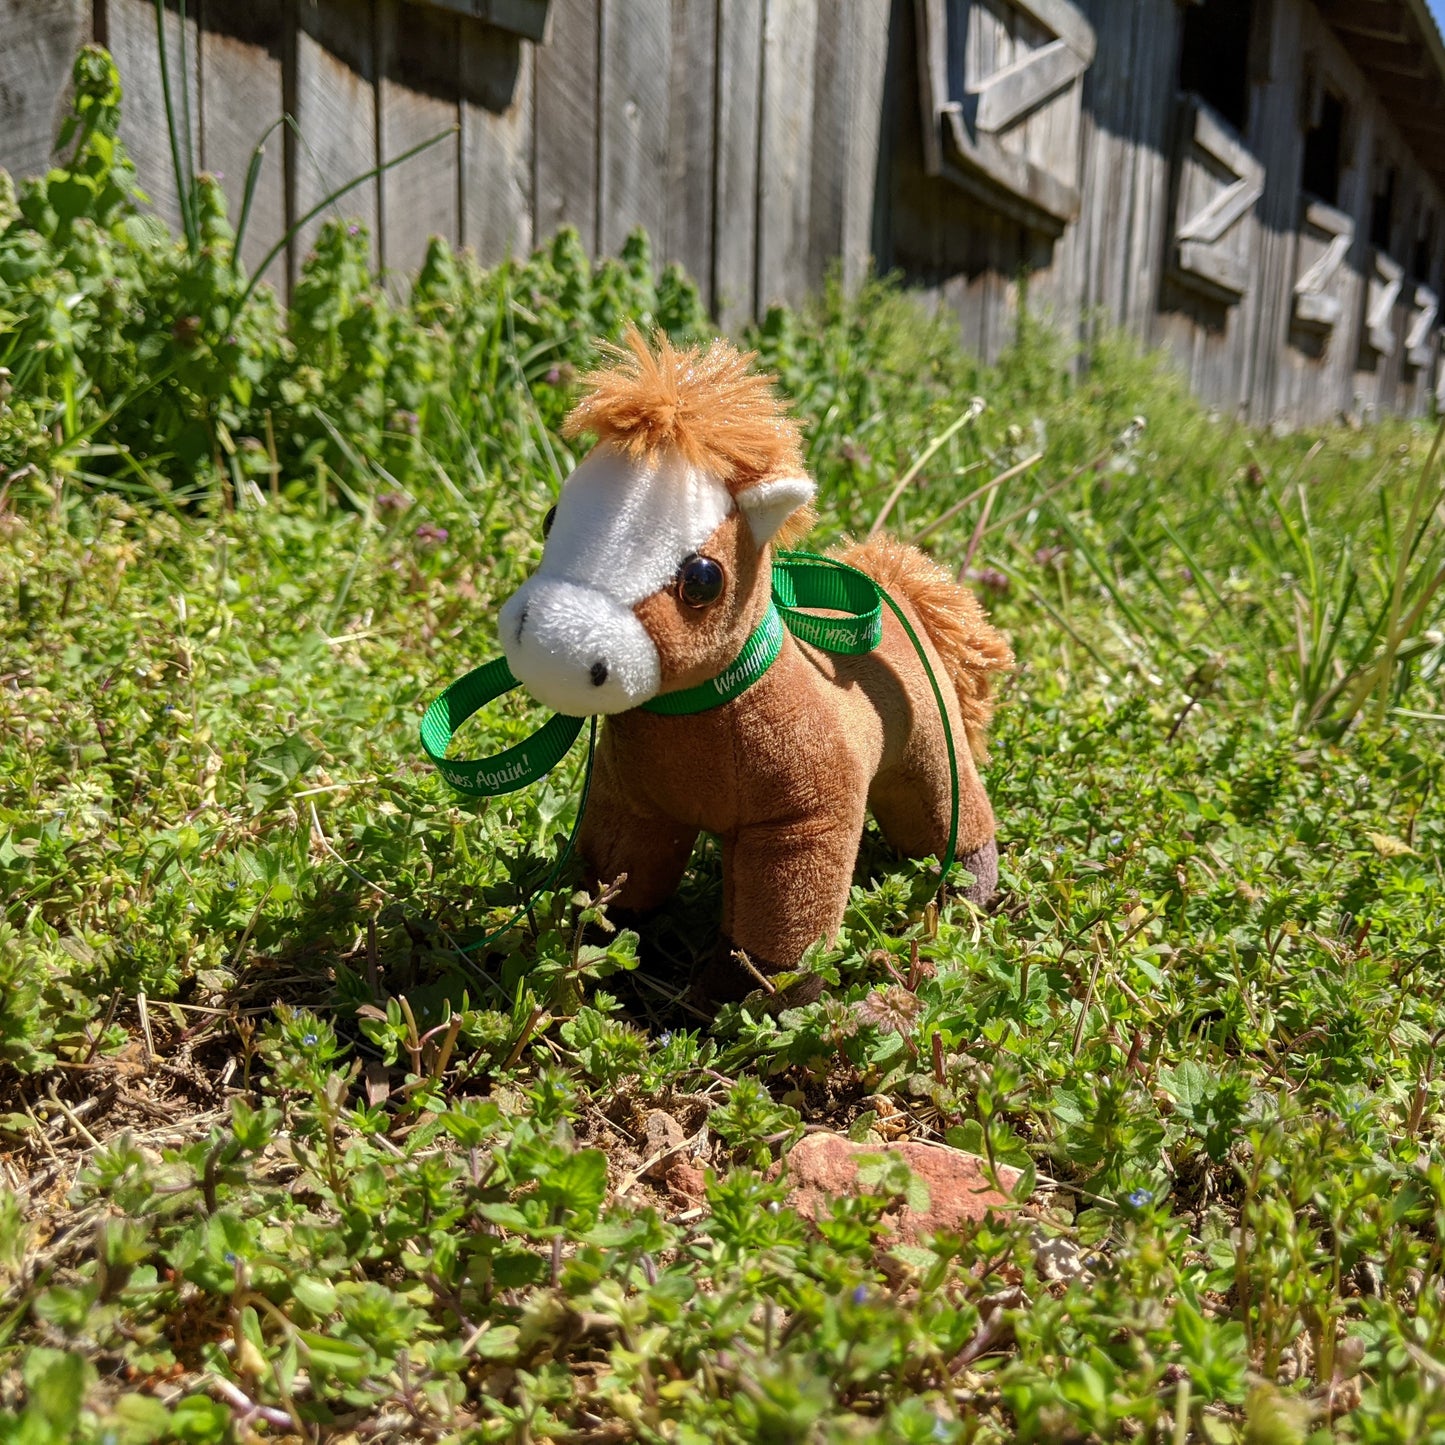 Duke Plush Toy Horse Character from the book series The Adventures of Cowboy Cinch & Wrangler Rein